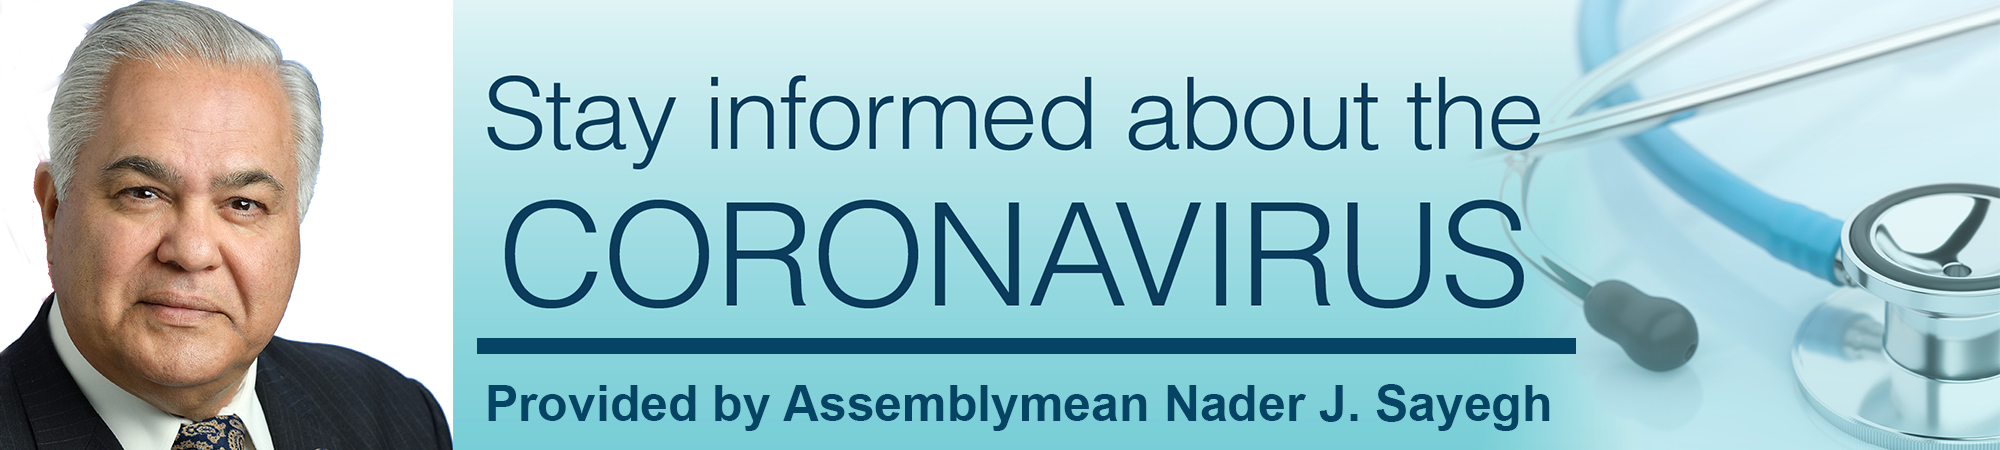 Stay Informed About the Coronavirus - Provided by Assemblyman Nader J. Sayegh